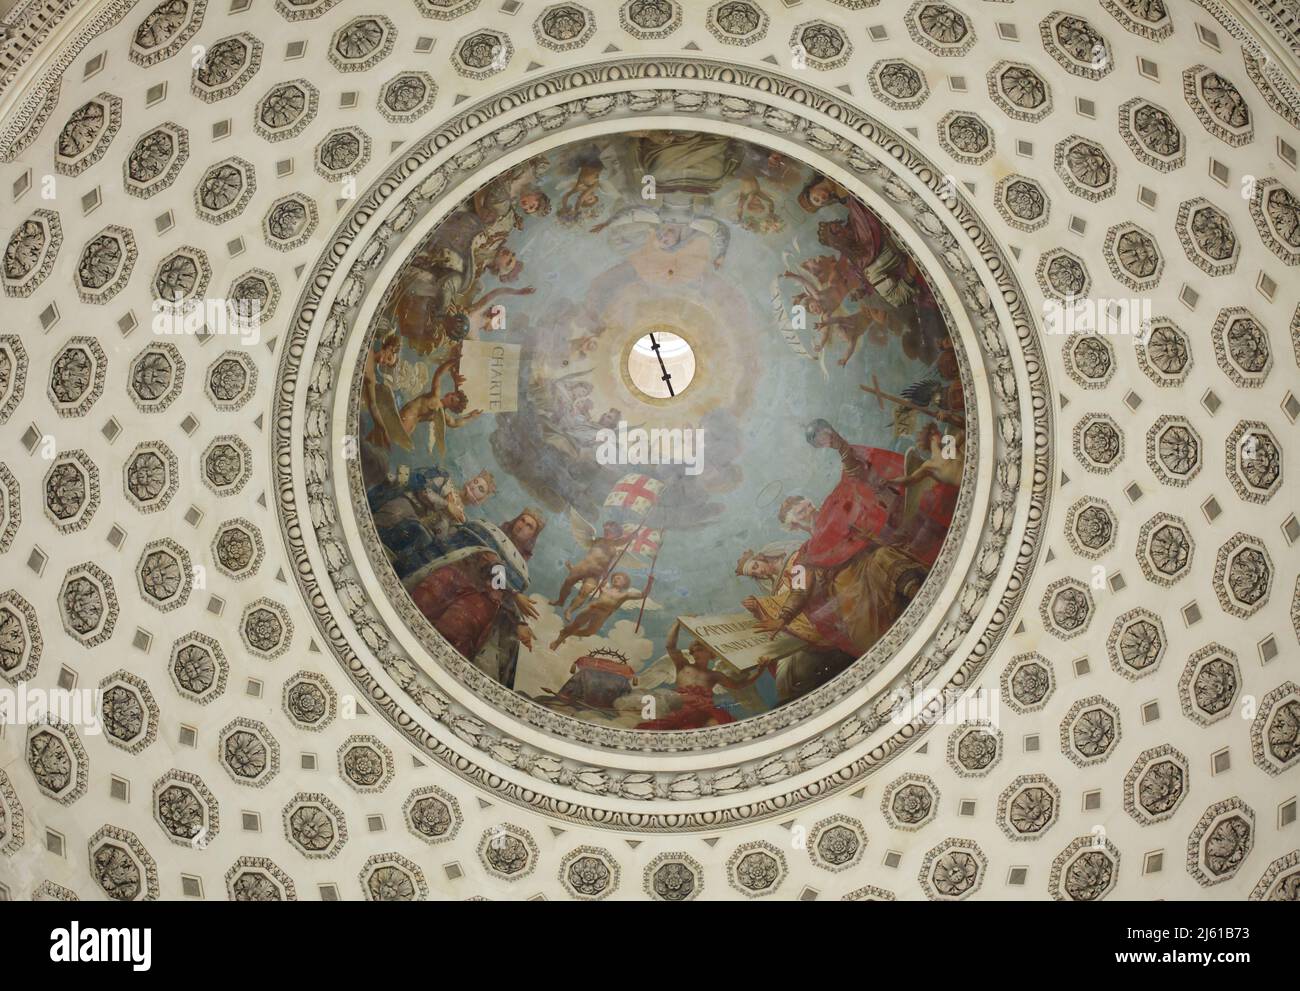 The Apotheosis of Saint Genevieve depicted in the fresco designed by French painter Antoine-Jean Gros (1811–1834) inside the main dome of the Panthéon designed by French architect Jacques-Germain Soufflot (1758-1790) in Paris, France. Stock Photo